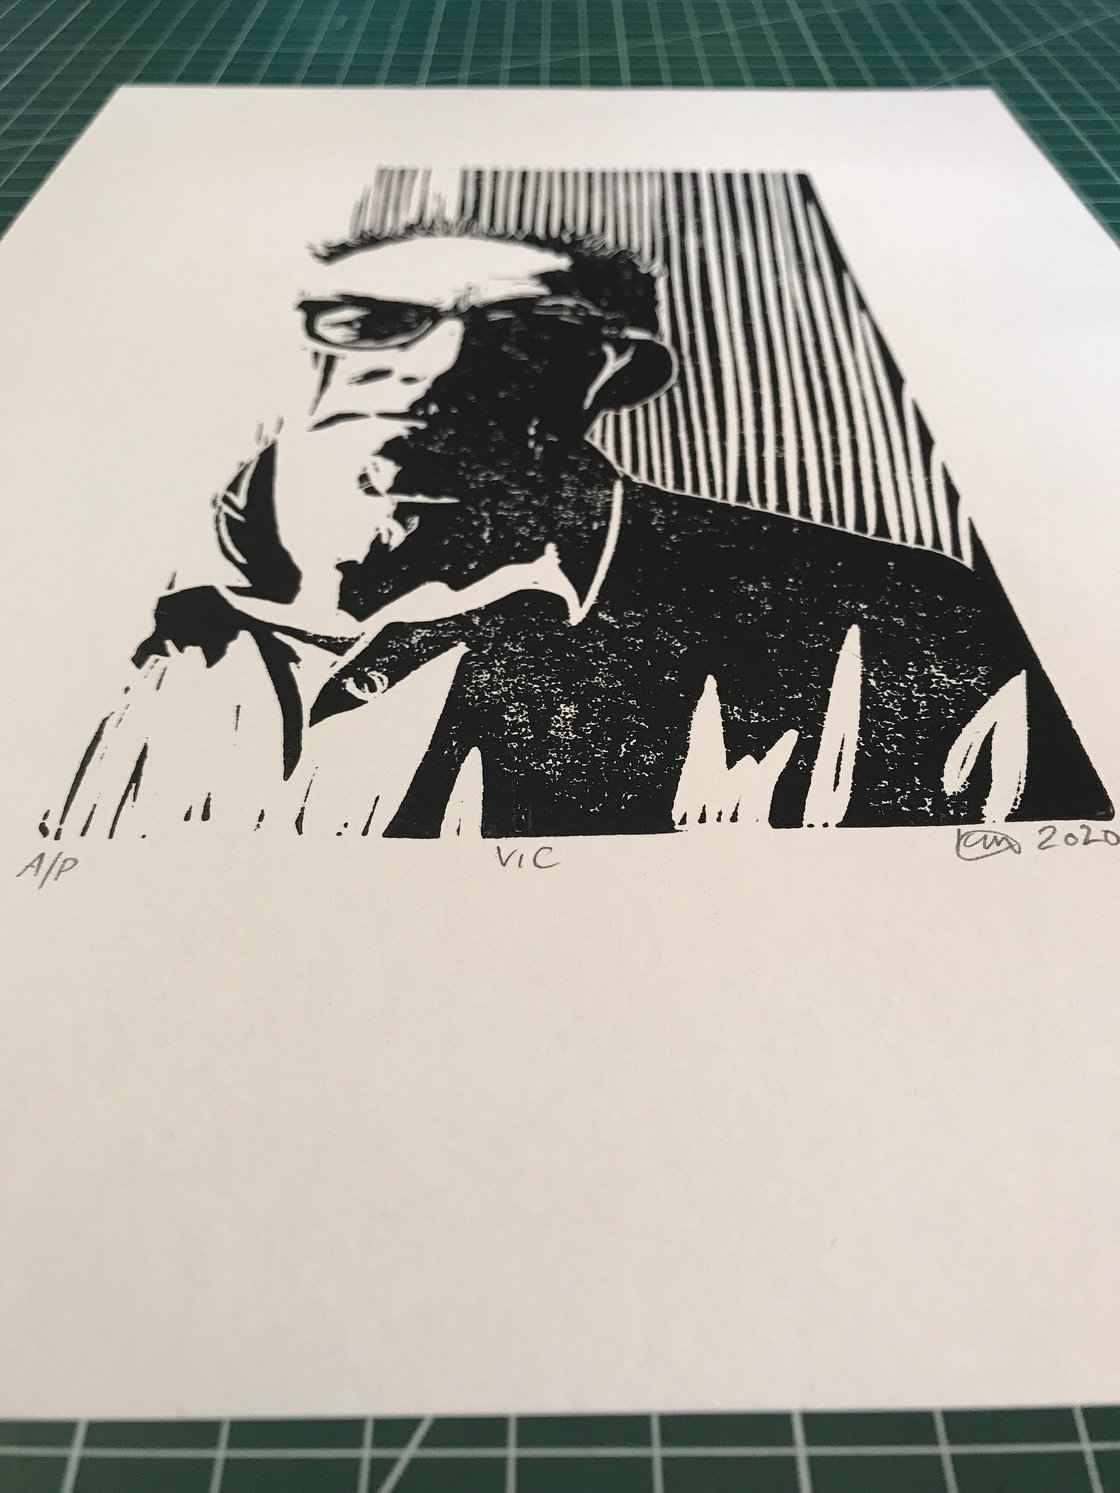 Image of Vic Godard. Subway Sect. Hand Made. Original A4 linocut print. Limited and Signed. Art.